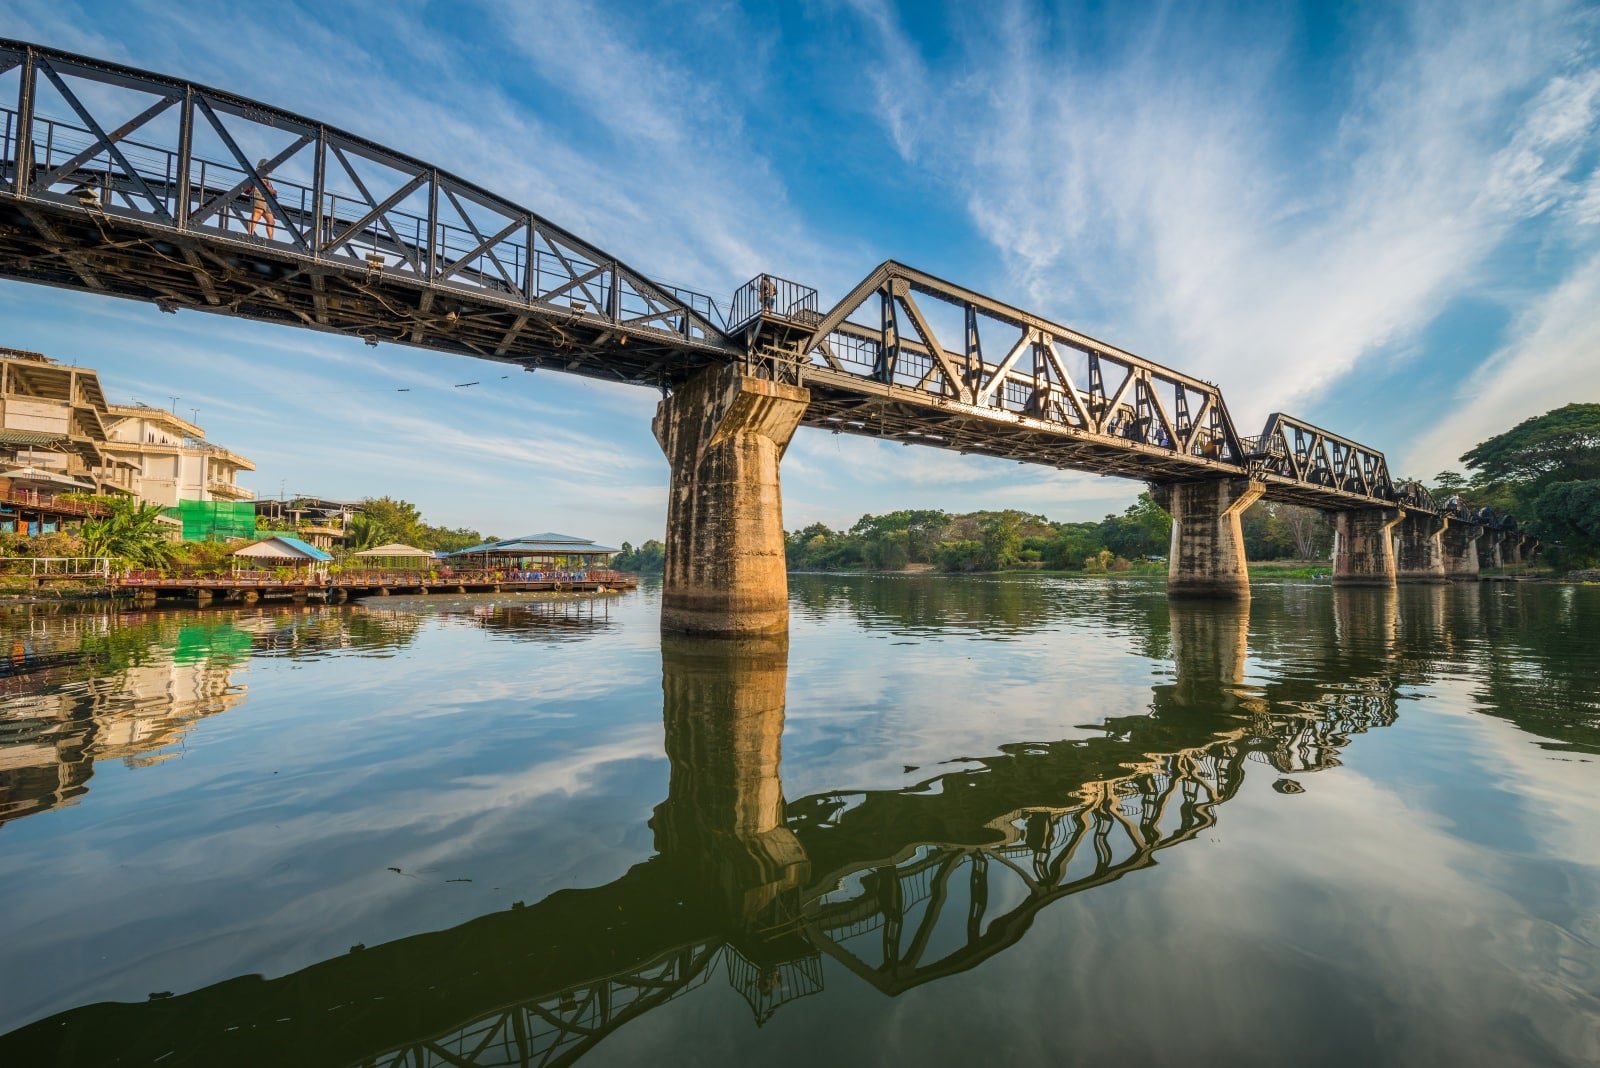 <p><span>As you approach the Bridge Over the River Kwai, you’re stepping into a chapter of World War II history. This bridge, a part of the infamous Death Railway, was built under harrowing conditions by prisoners of war. Today, it is a poignant reminder of the resilience and suffering of those who built it.</span></p> <p><span>The structure, set against the picturesque River Kwai, offers a solemn yet beautiful scene. Nearby museums enrich your understanding, providing historical context to this iconic landmark. Walking across this bridge, you’re walking through history, each step a tribute to the past.</span></p> <p><b>Insider’s Tip: </b>To avoid the heat and crowds, early mornings or late evenings are ideal for visiting<span>. </span></p> <p><b>When To Travel: </b><span>The cooler months from November to February are the best time to visit. </span></p> <p><b>How To Get There: </b><span>Kanchanaburi is accessible by bus or train from Bangkok, with the journey taking approximately 2-3 hours.</span></p>